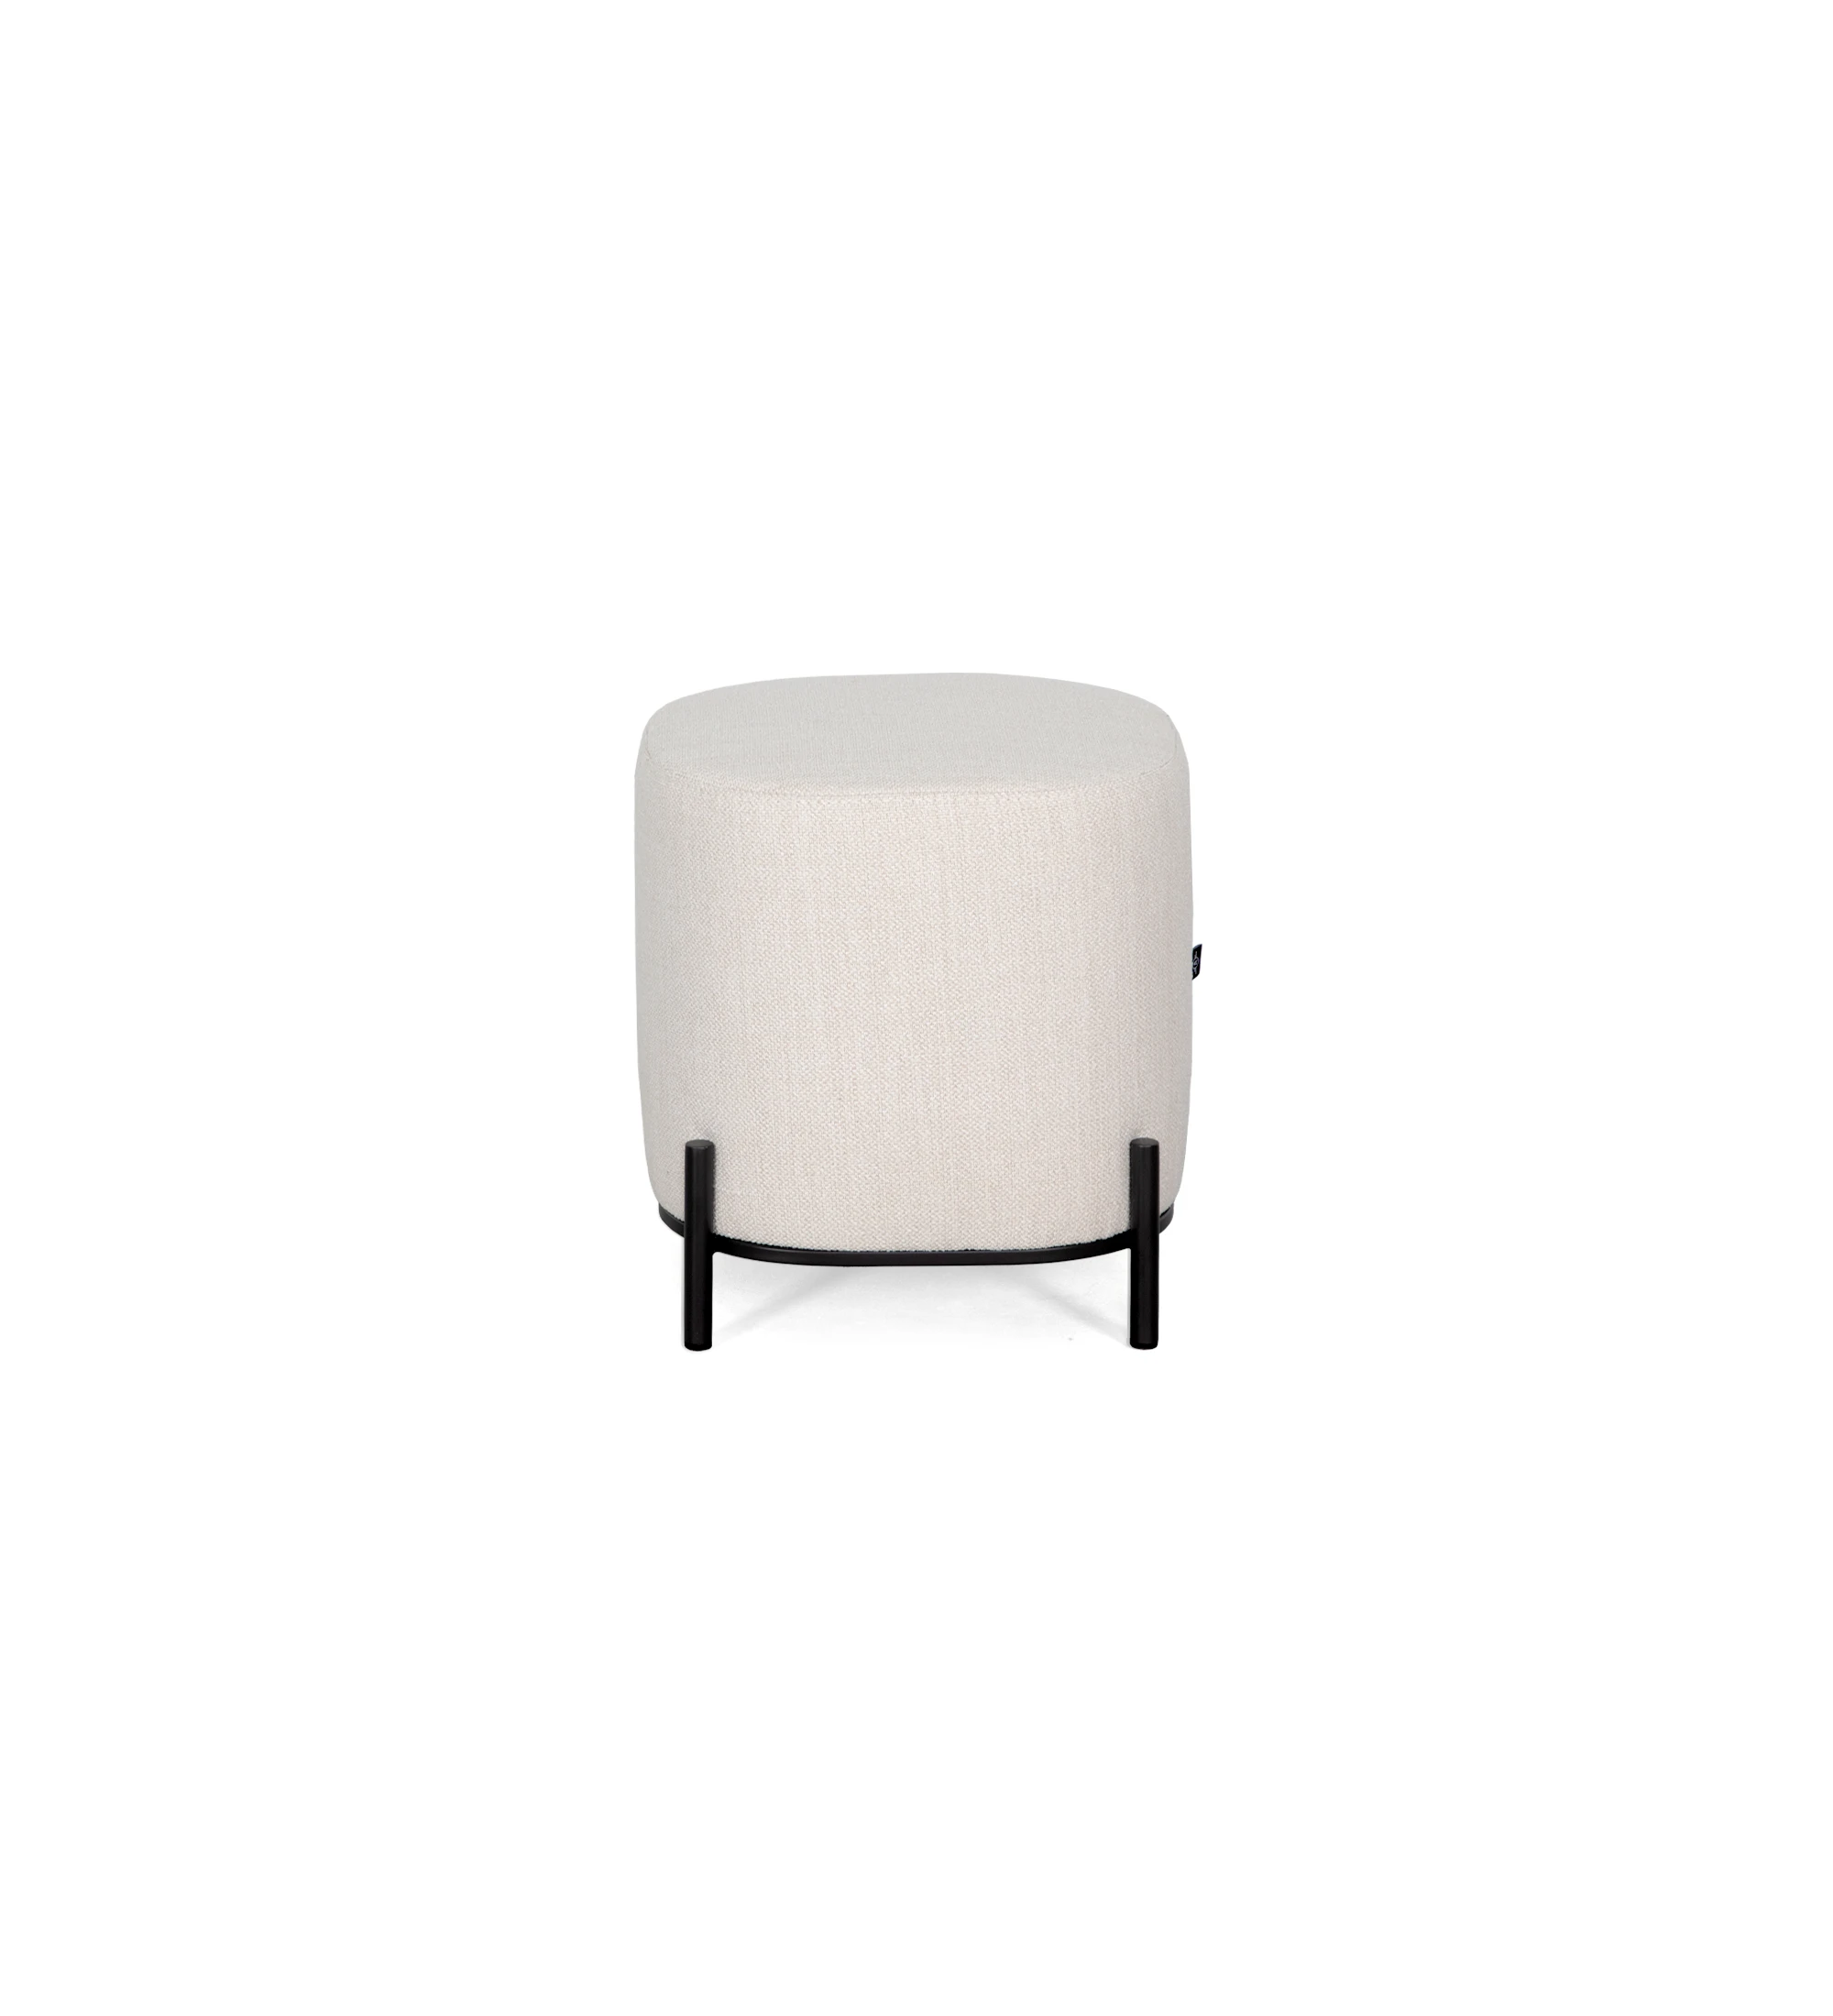 Cannes square puff, upholstered in pearl fabric, black lacquered metal feet, 38 x 38 cm.